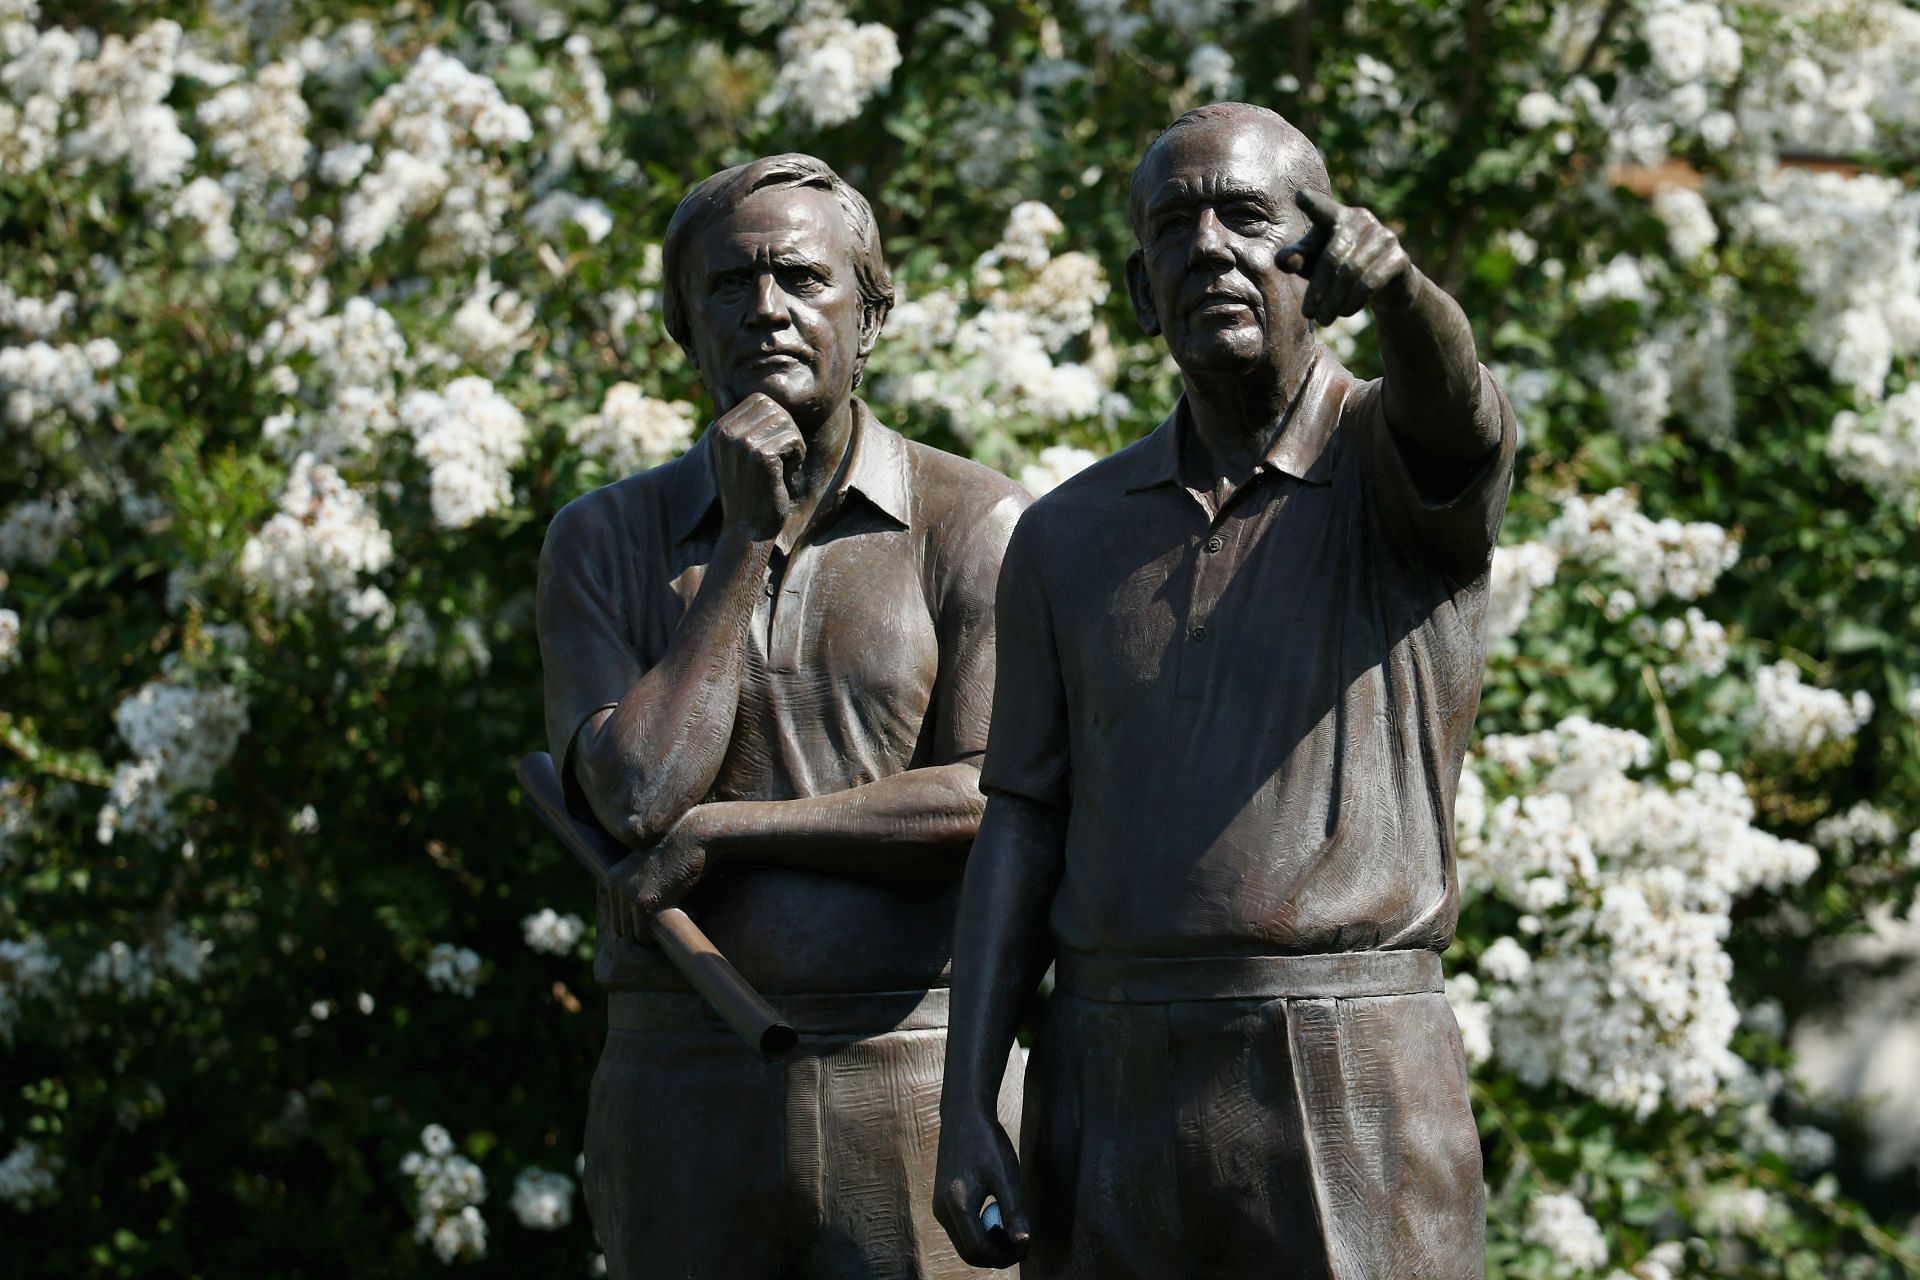 A sculpture of Jack Nicklaus and Dwight Gahm at the Valhalla Golf Club (Image via Getty)